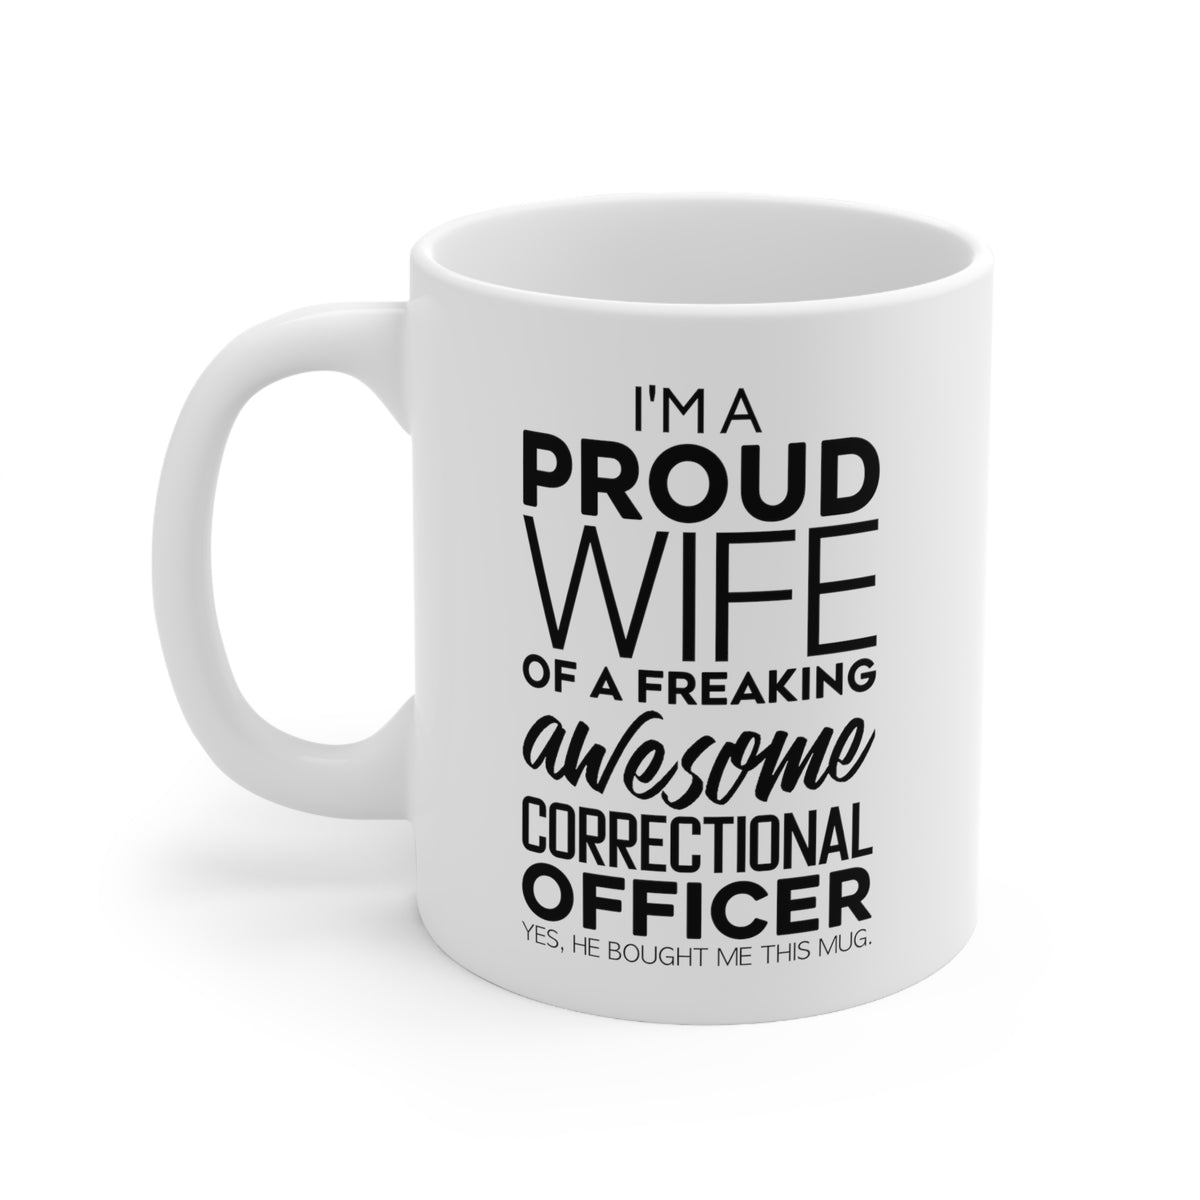 Funny Correctional officer Gifts 11oz Coffee Mug - I’m a Proud Wife of a Freaking Awesome Correctional officer - Best Valentine Gifts for her and Sarc